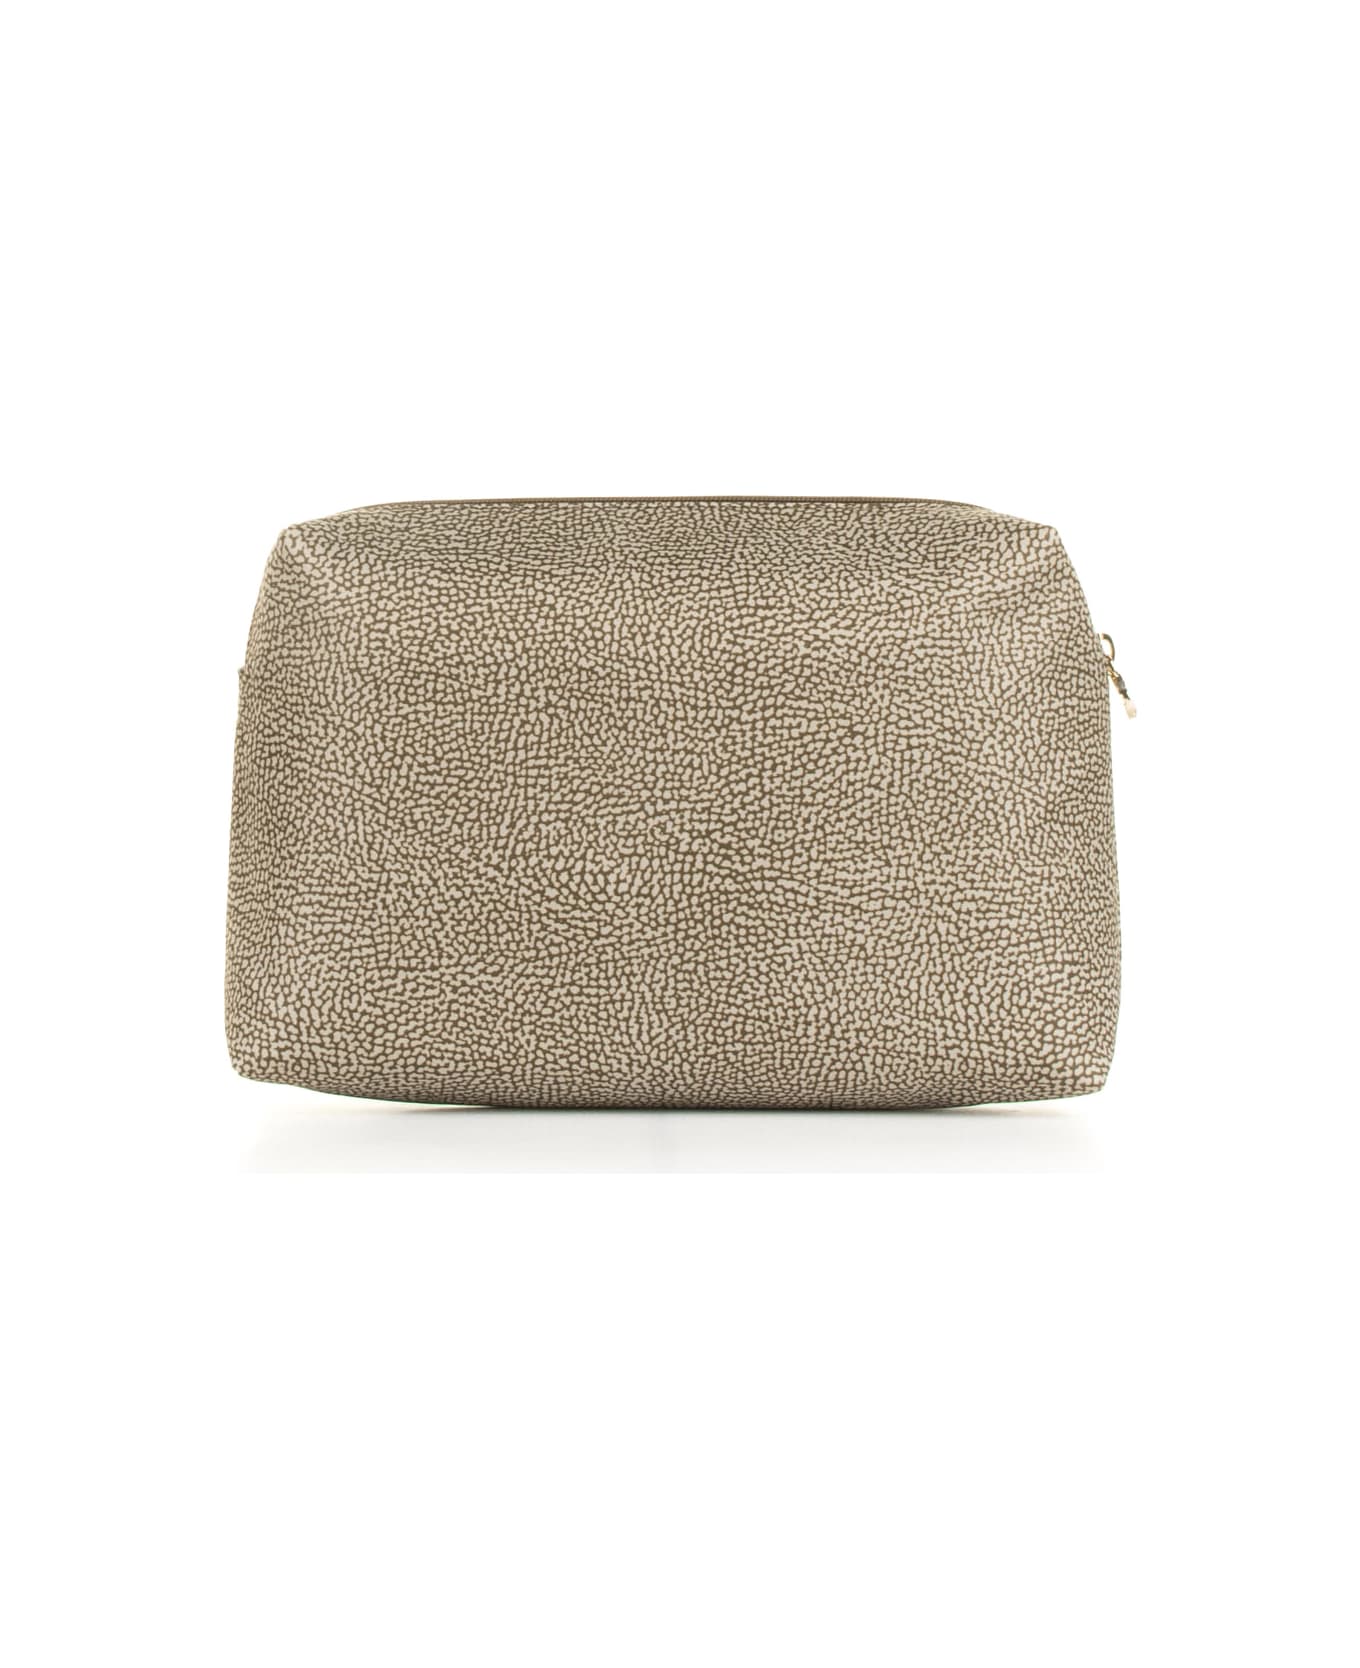 Borbonese Medium Clutch Bag In Op Fabric And Leather - BEIGE/MARRONE クラッチバッグ